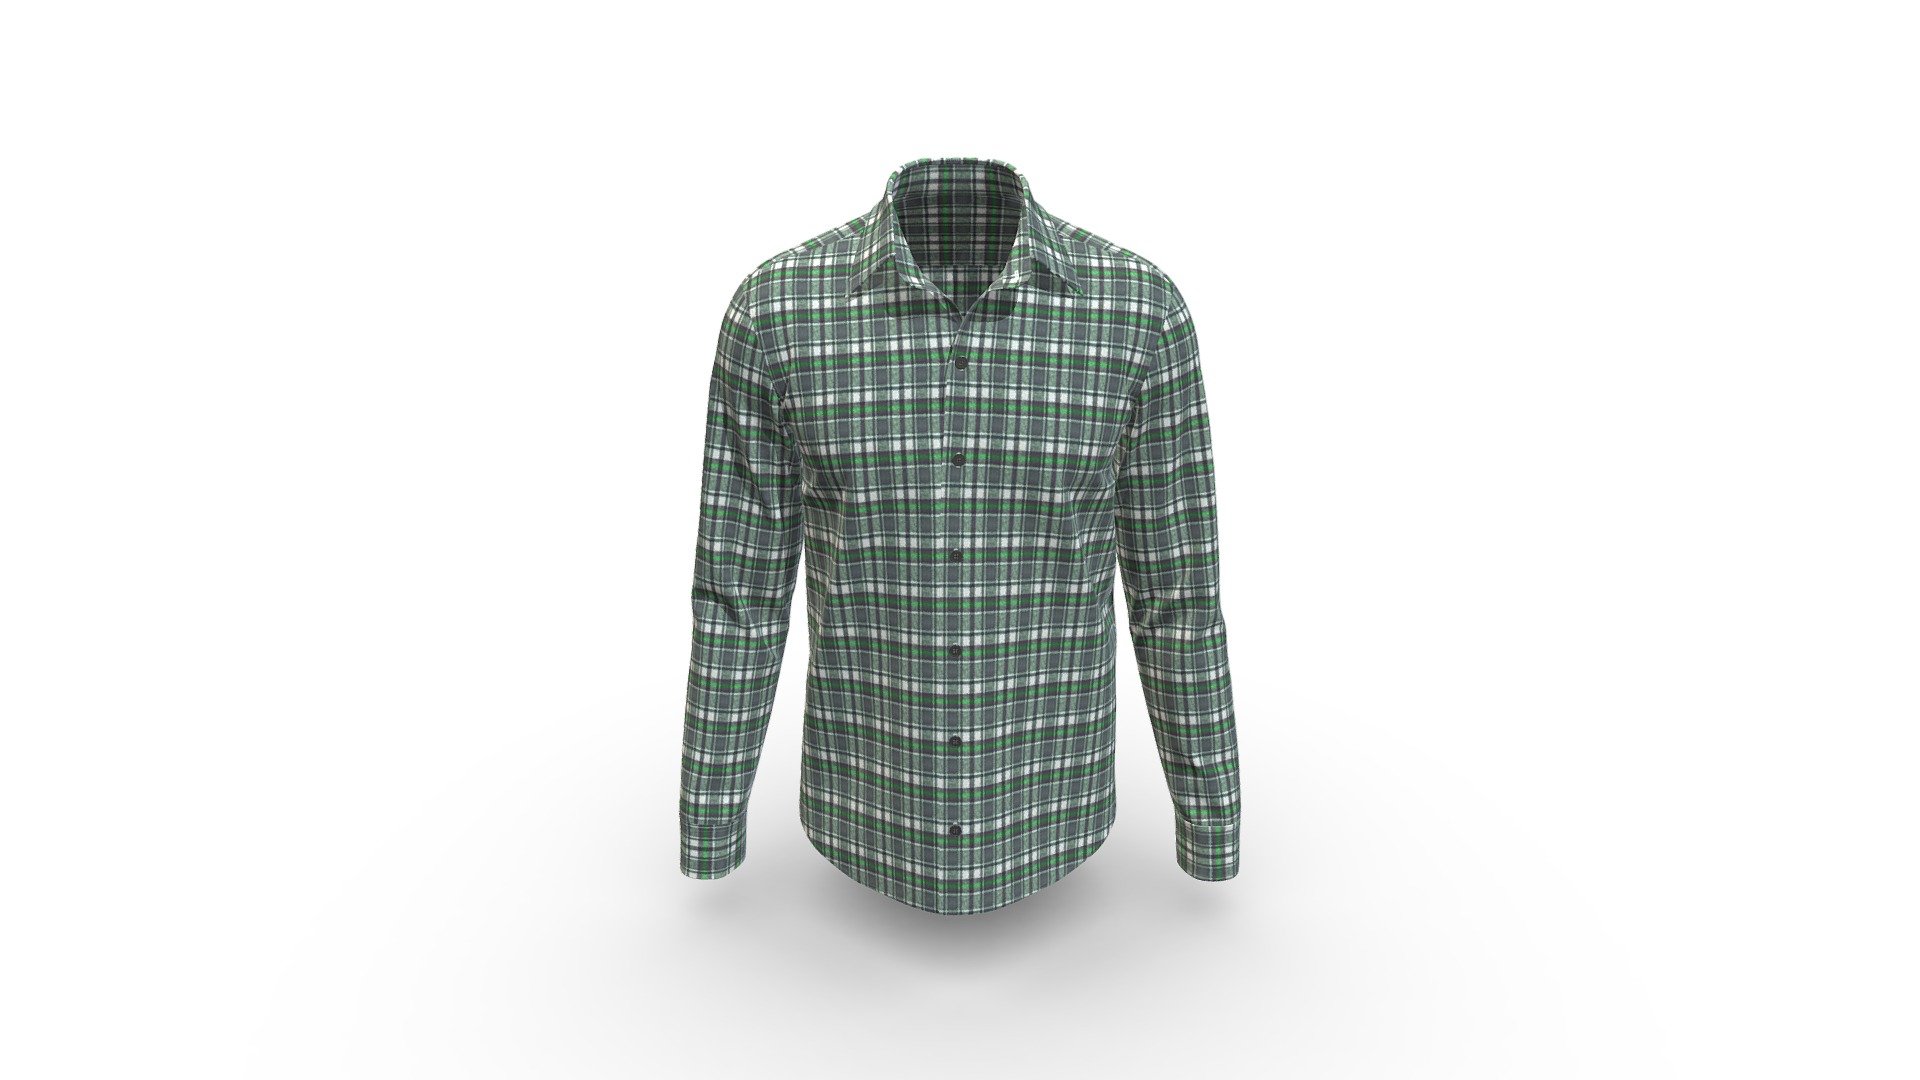 Cloth Title = Men's Basic Slim Fit Casual Shirt OBJ 

SKU = DG100057
 
Product Type = Shirt 

Cloth Length = Regular 

Body Fit = Slim Fit 

Occasion = Casual  

Sleeve Style = Set In Sleeve 


Our Services:

3D Apparel Design.

OBJ,FBX,GLTF Making with High/Low Poly.

Fabric Digitalization.

Mockup making.

3D Teck Pack.

Pattern Making.

2D Illustration.

Cloth Animation and 360 Spin Video.


Contact us:- 

Email: info@digitalfashionwear.com 

Website: https://digitalfashionwear.com 

WhatsApp No: +8801759350445 


We designed all the types of cloth specially focused on product visualization, e-commerce, fitting, and production. 

We will design: 

T-shirts 

Polo shirts 

Hoodies 

Sweatshirt 

Jackets 

Shirts 

TankTops 

Trousers 

Bras 

Underwear 

Blazer 

Aprons 

Leggings 

and All Fashion items. 





Our goal is to make sure what we provide you, meets your demand 3d model